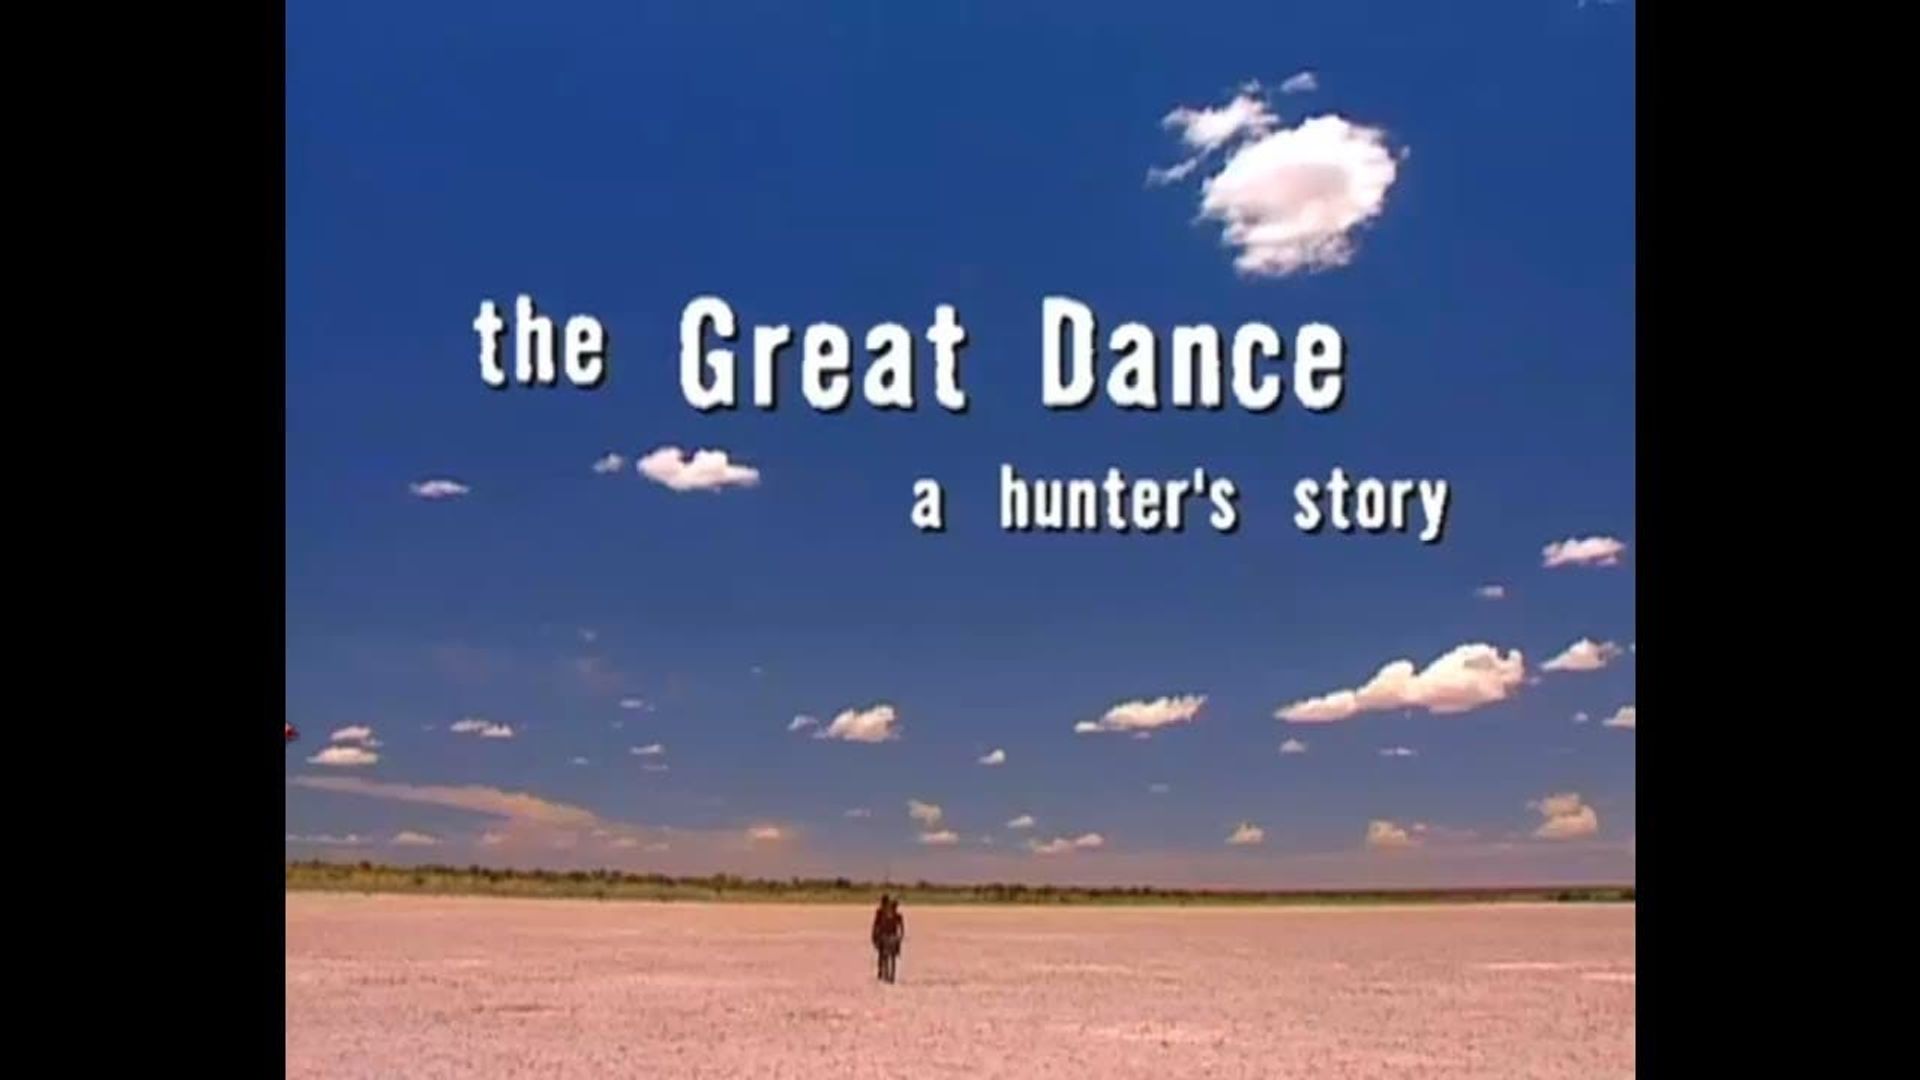 The Great Dance: A Hunter's Story background